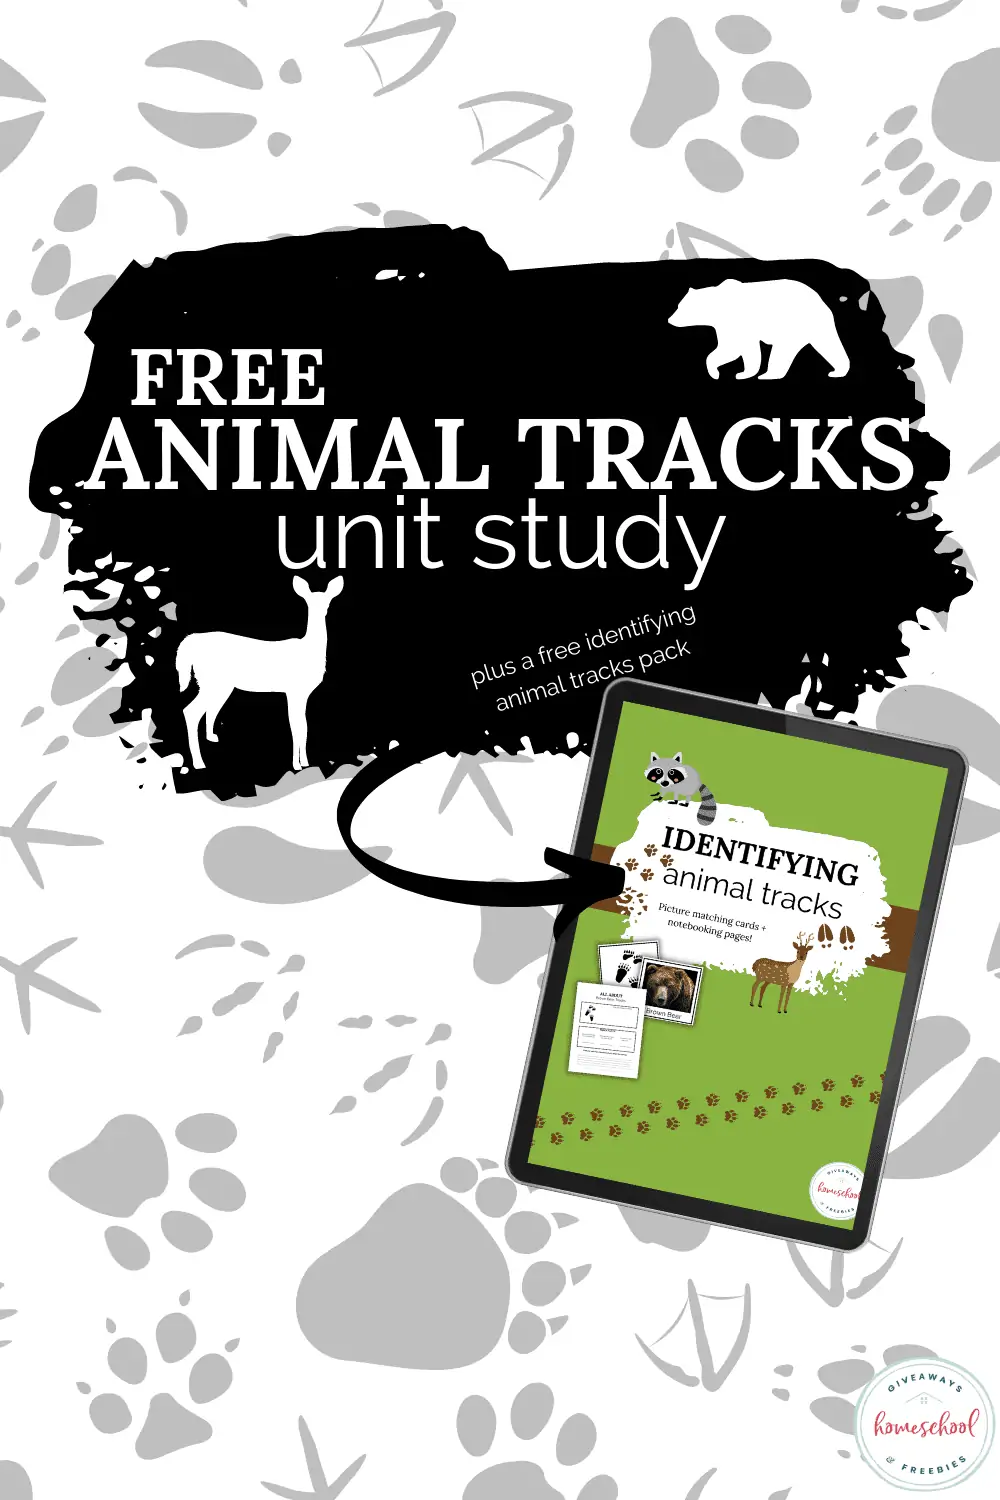 Free Animal Tracks Unit Study text with an arrow pointing to a tablet 